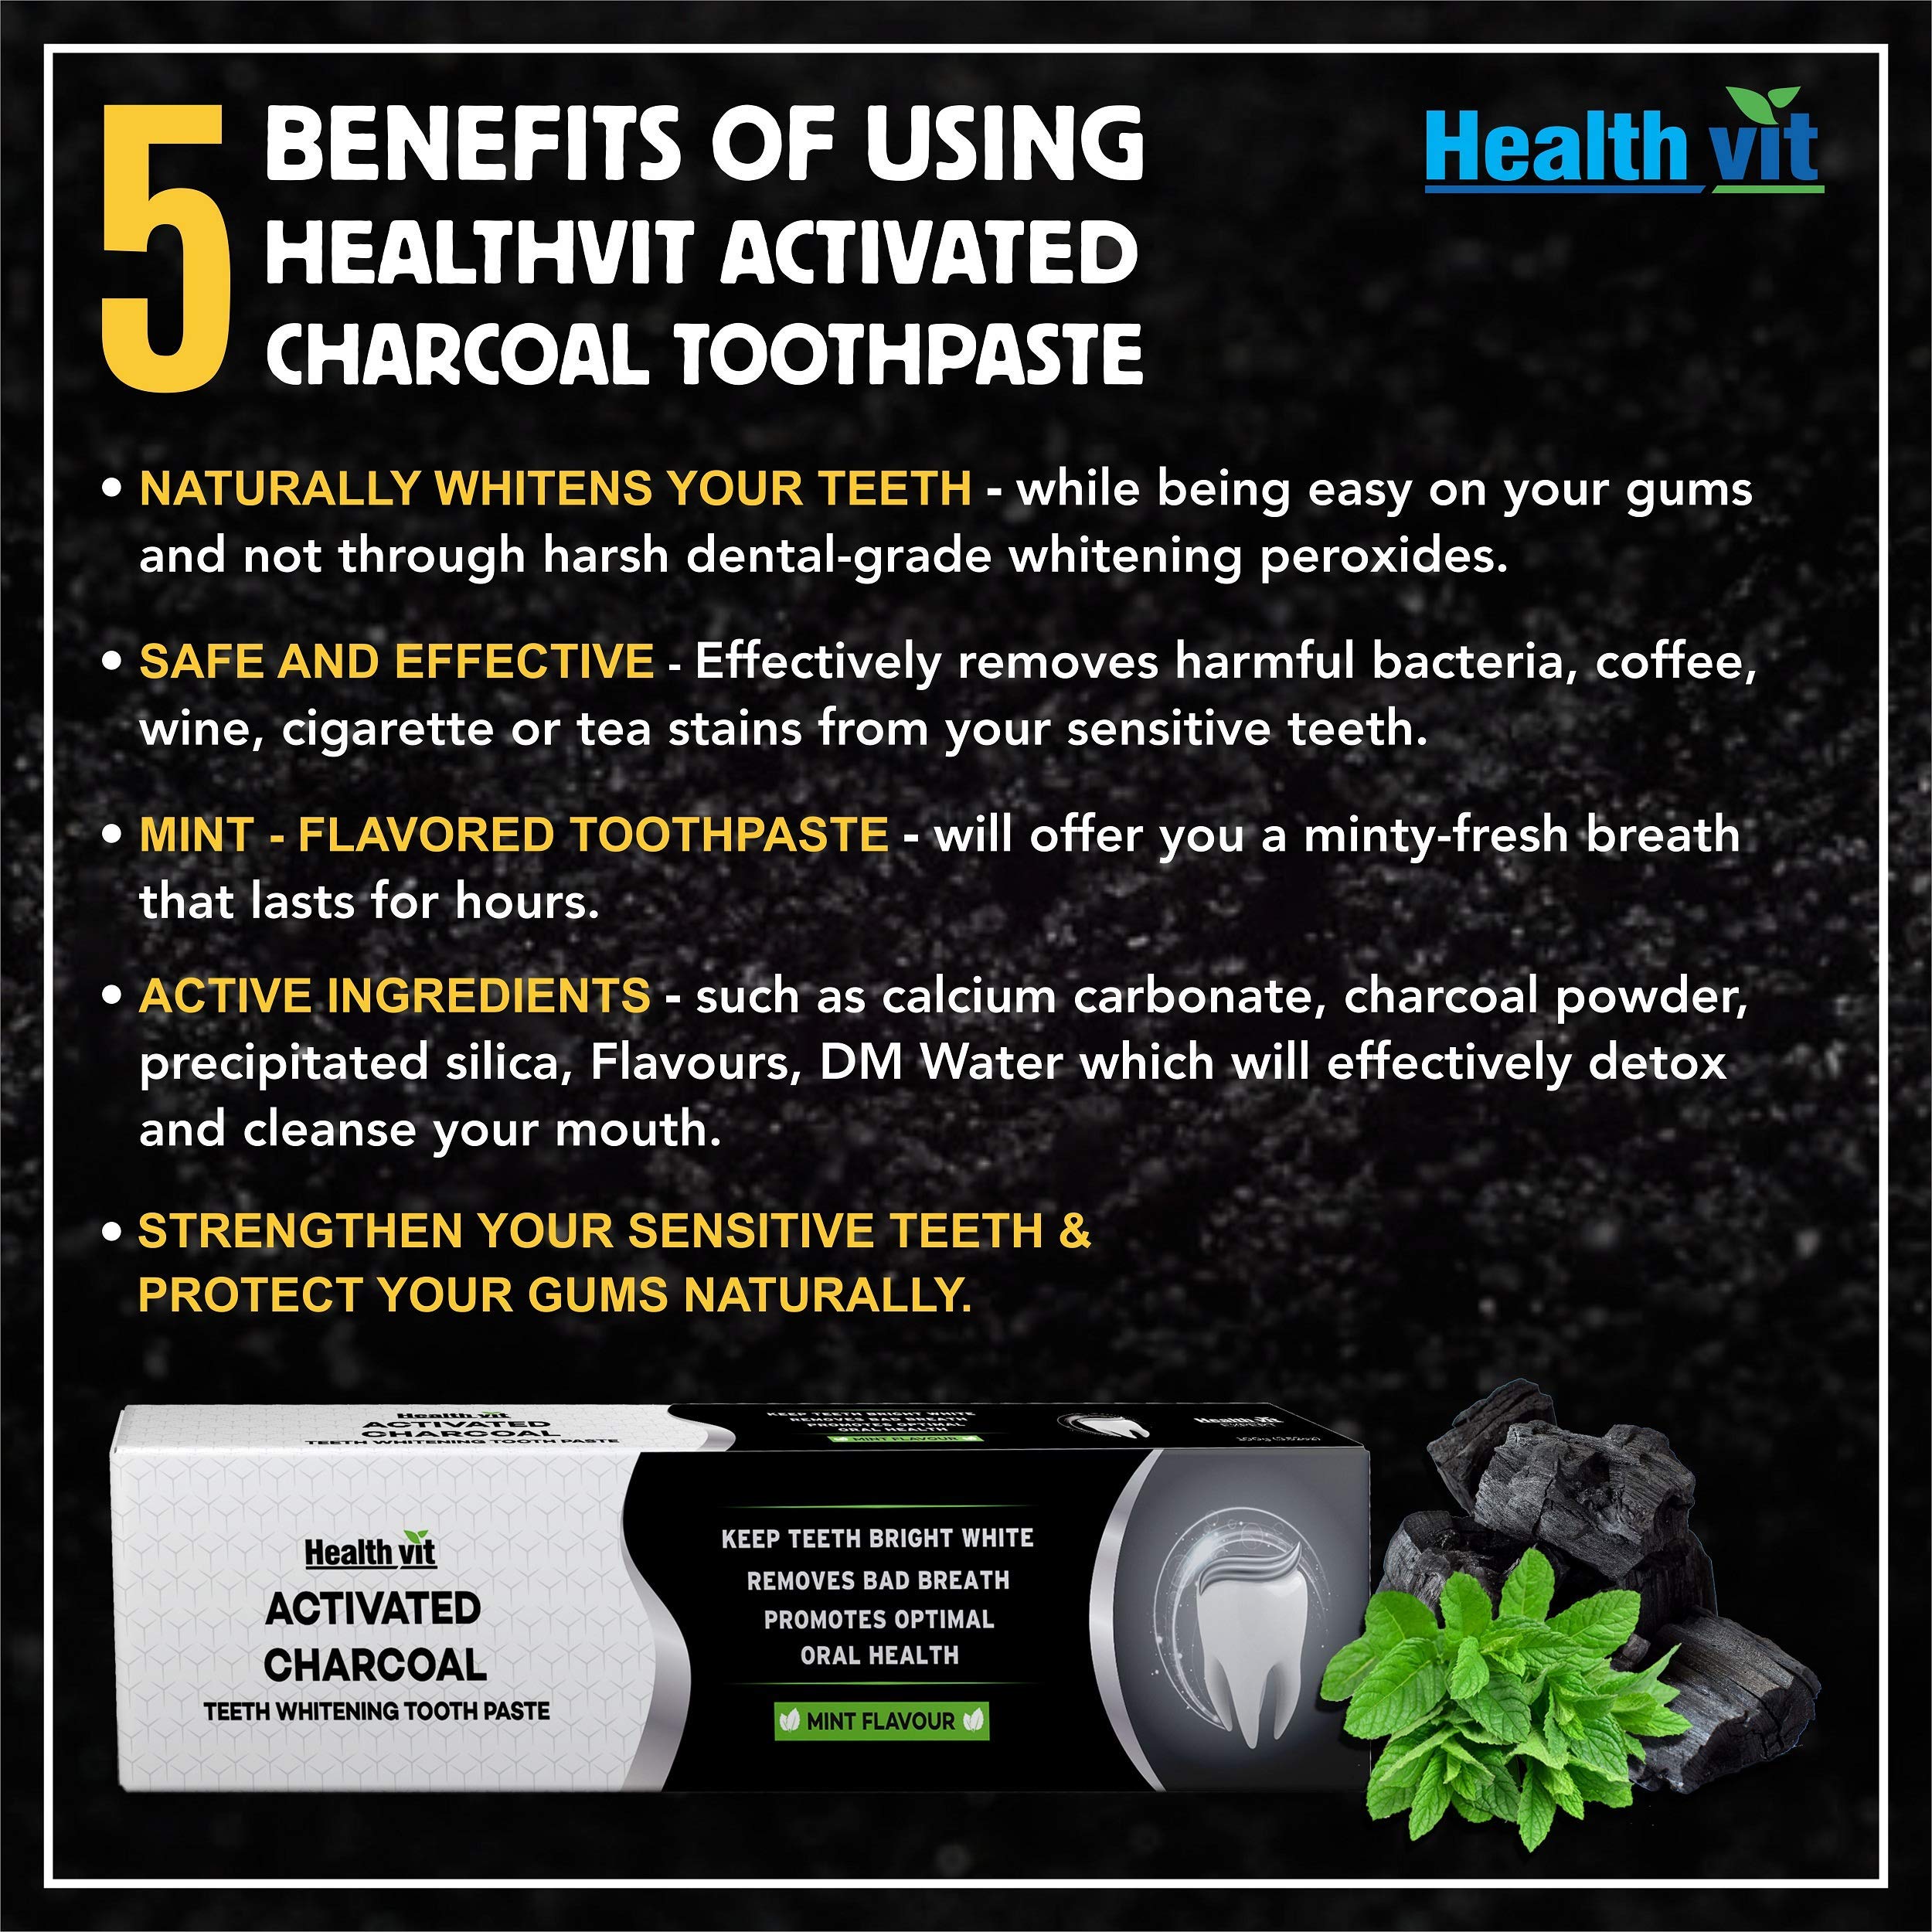 Healthvit Activated Charcoal Toothpaste For Teeth Whitening, Best Natural Whitener, Fluoride Free, Sulfate Free Mint Flavour (100g) - Pack of 1 100 g (Pack of 1)